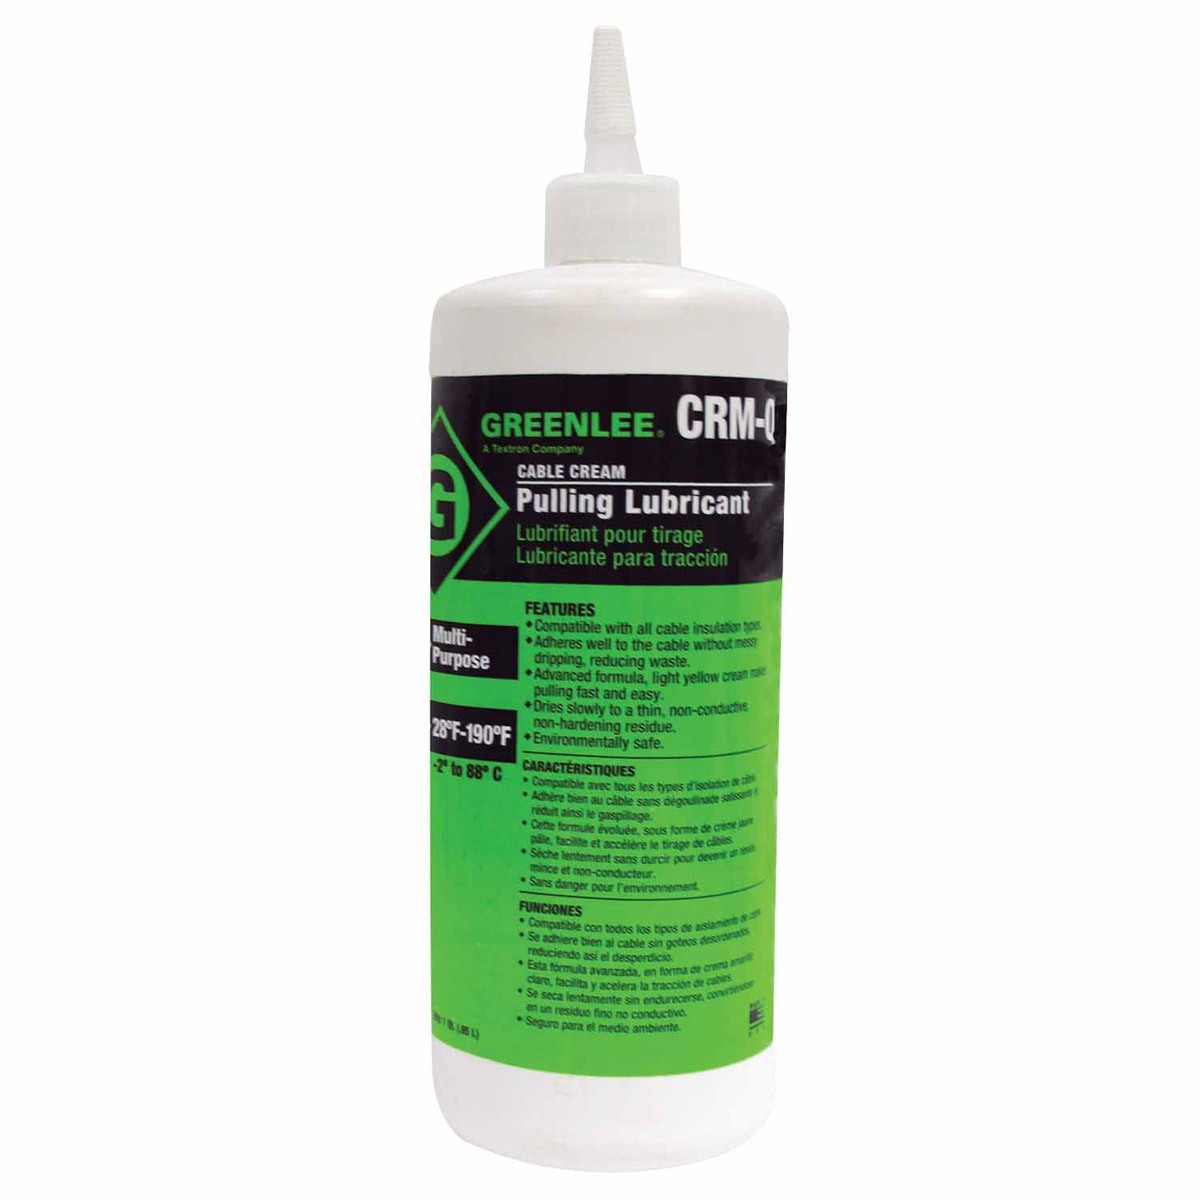 Greenlee CRM-Q Cable-Cream Cable Pulling Lubricant - 1 Quart